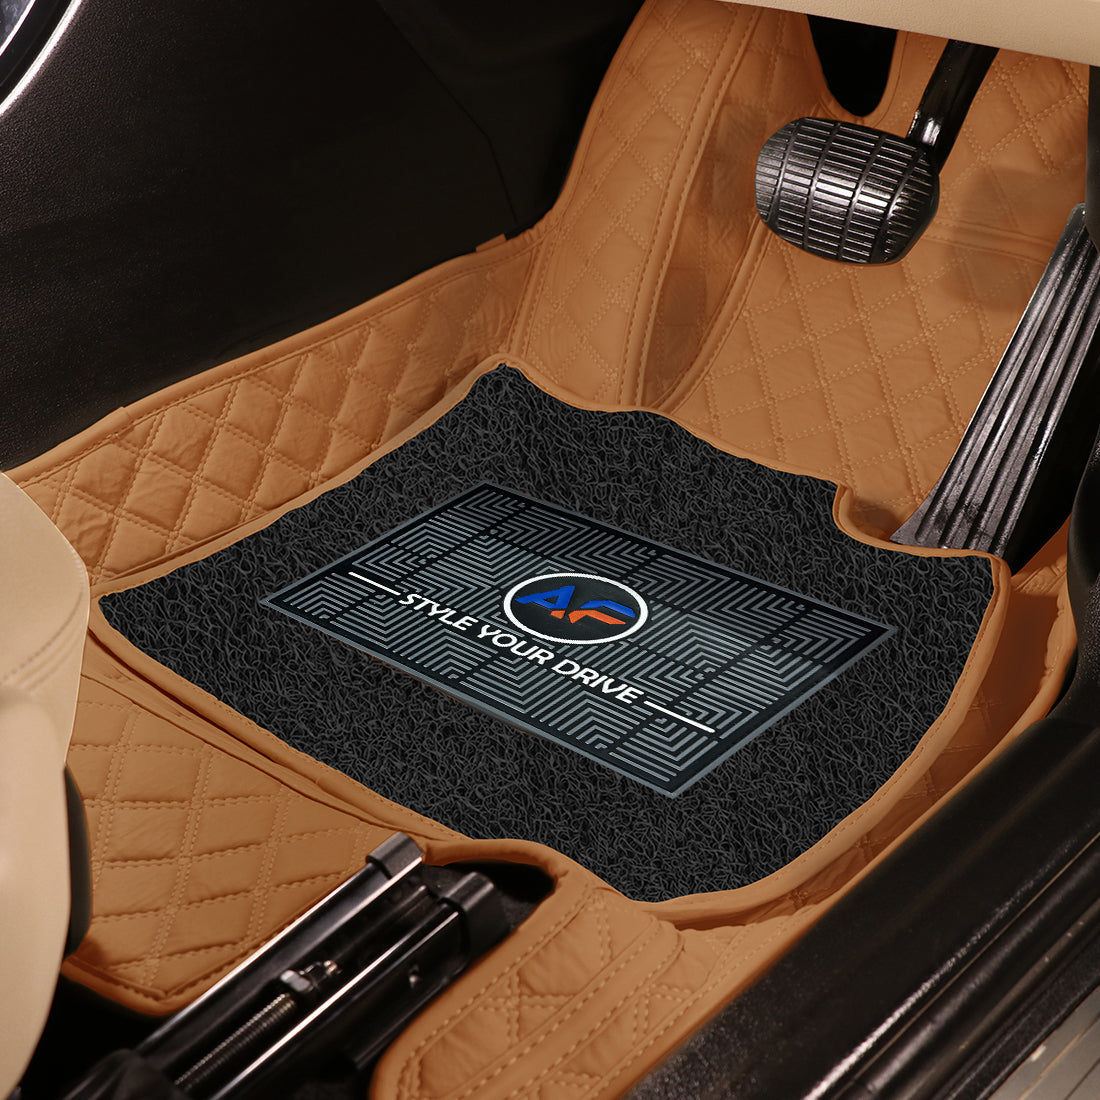 Toyota Hilux 2023-7D Luxury Car Mat, All Weather Proof, Anti-Skid, 100% Waterproof & Odorless with Unique Diamond Fish Design (24mm Luxury PU Leather, 2 Rows)